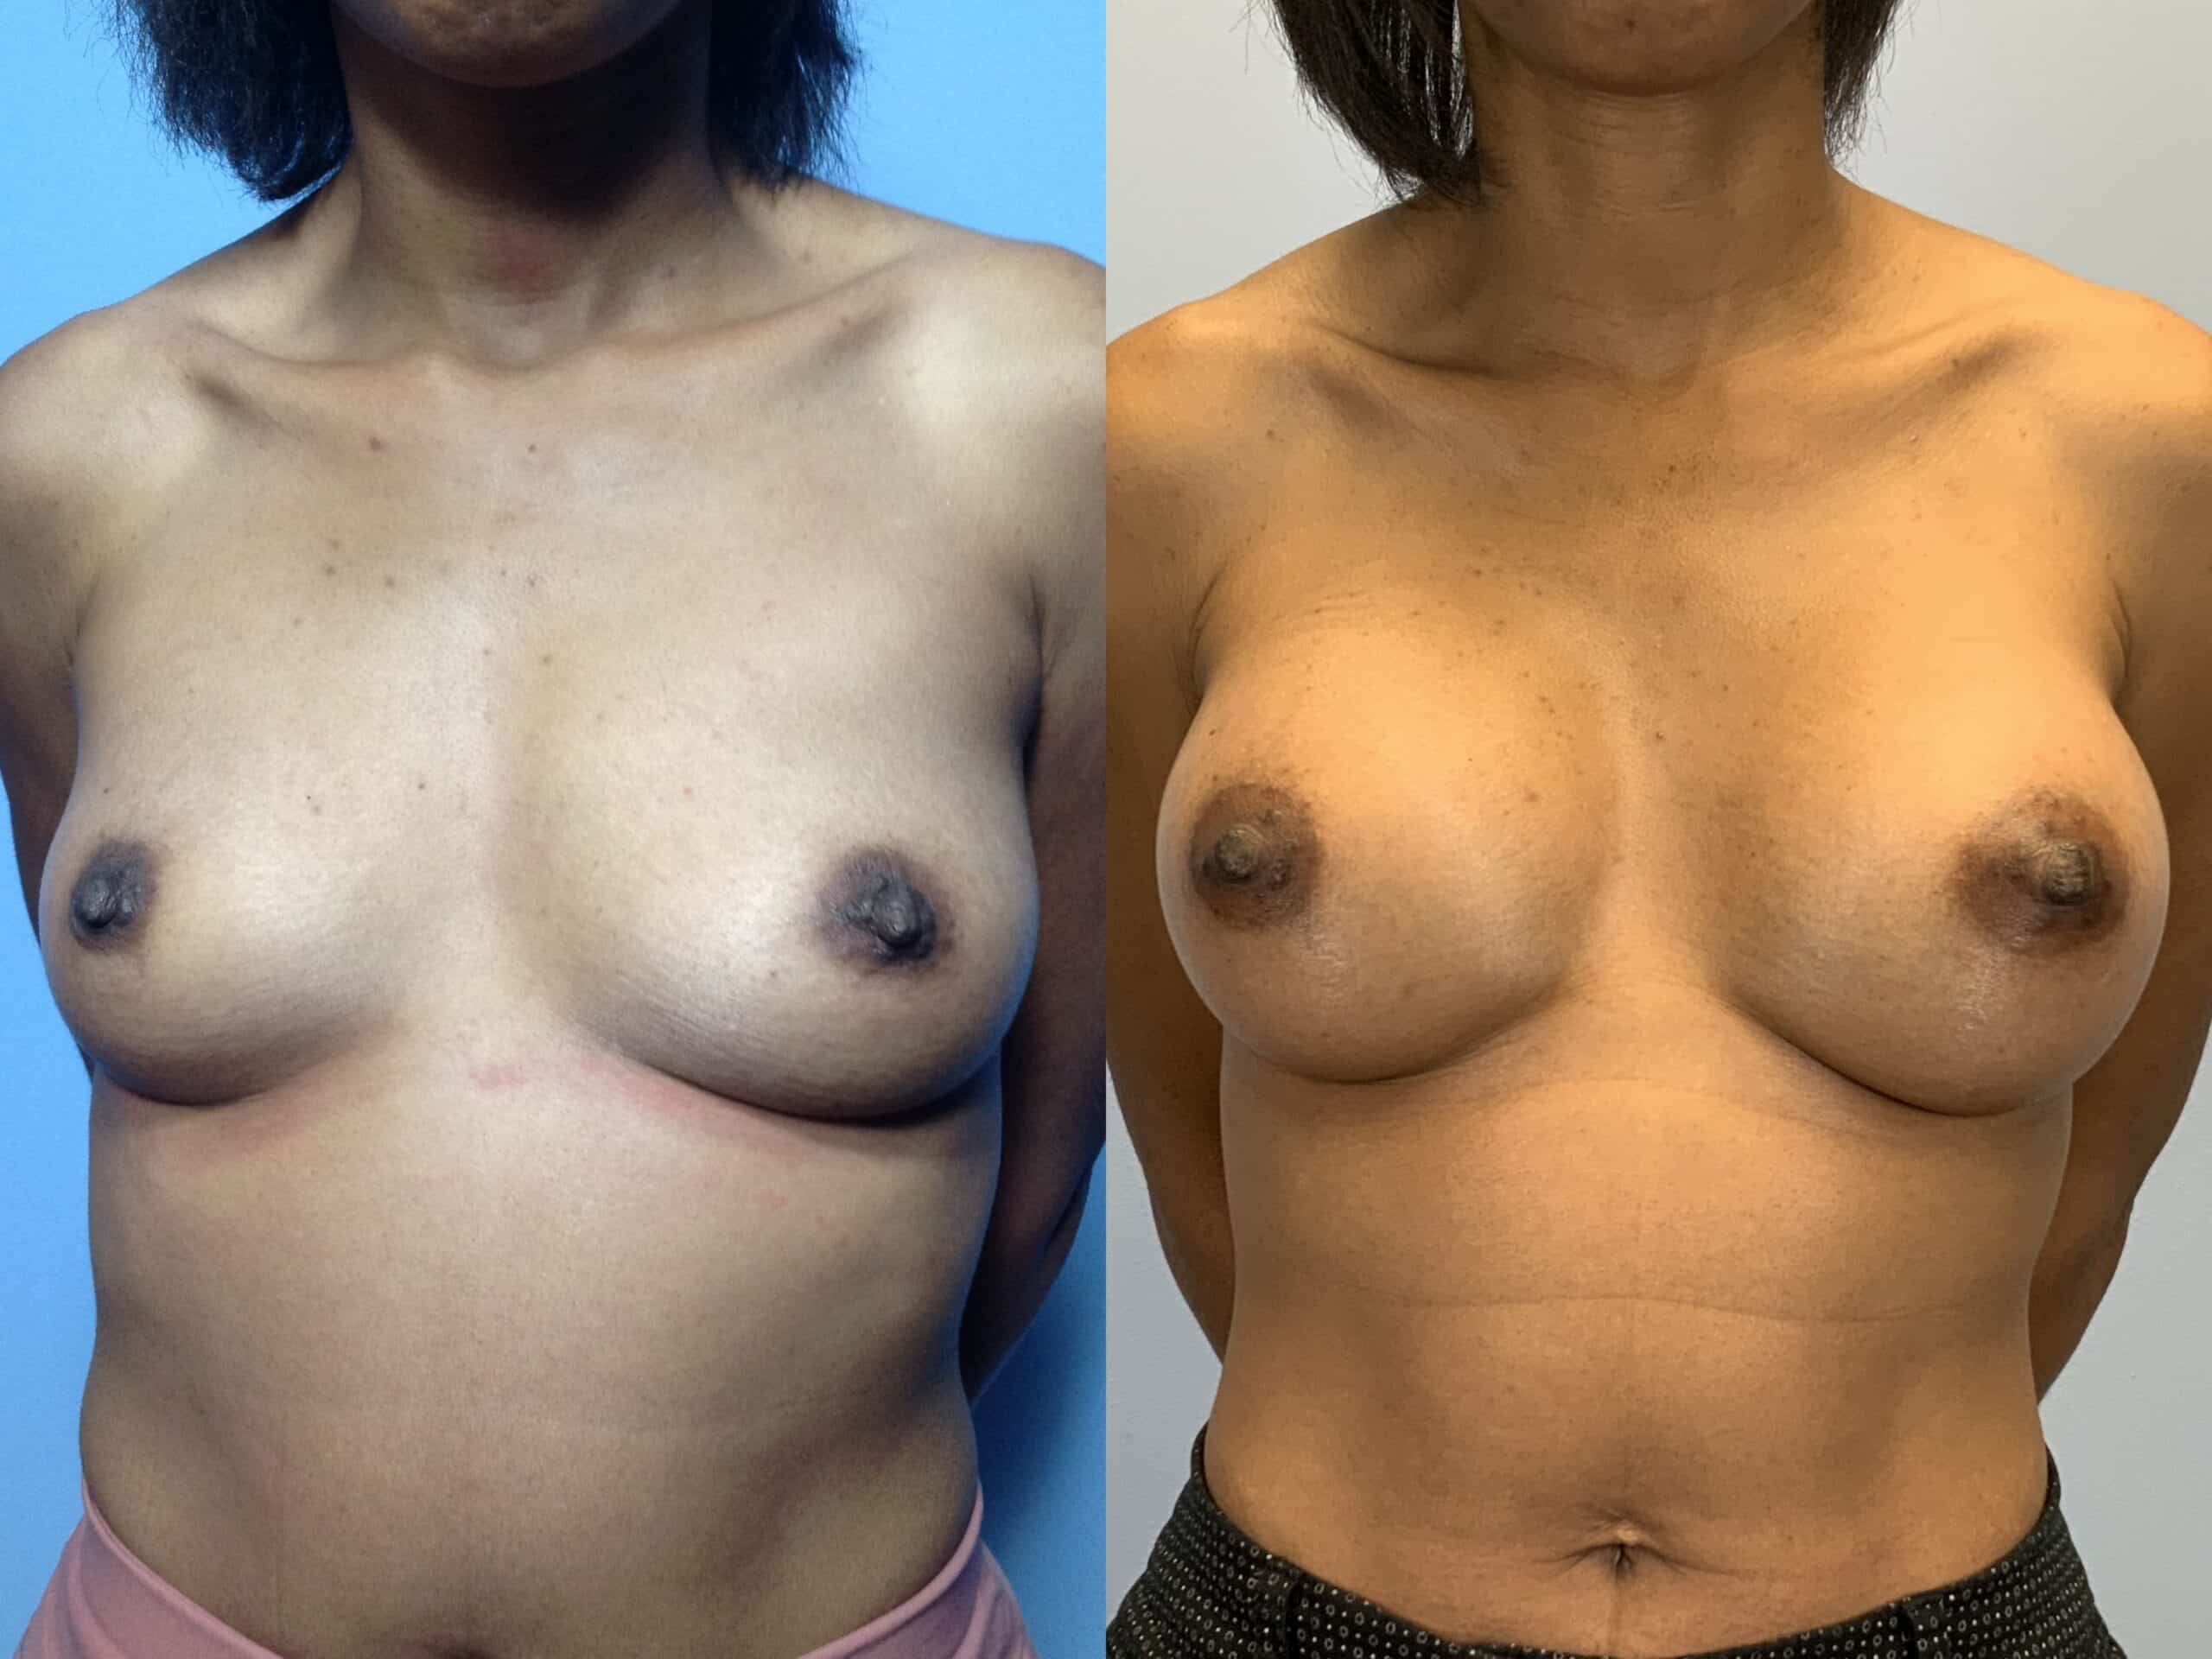 Before and after, patient 3 mo post op from Breast Augmentation and Level III Muscle Release procedures performed by Dr. Paul Vanek